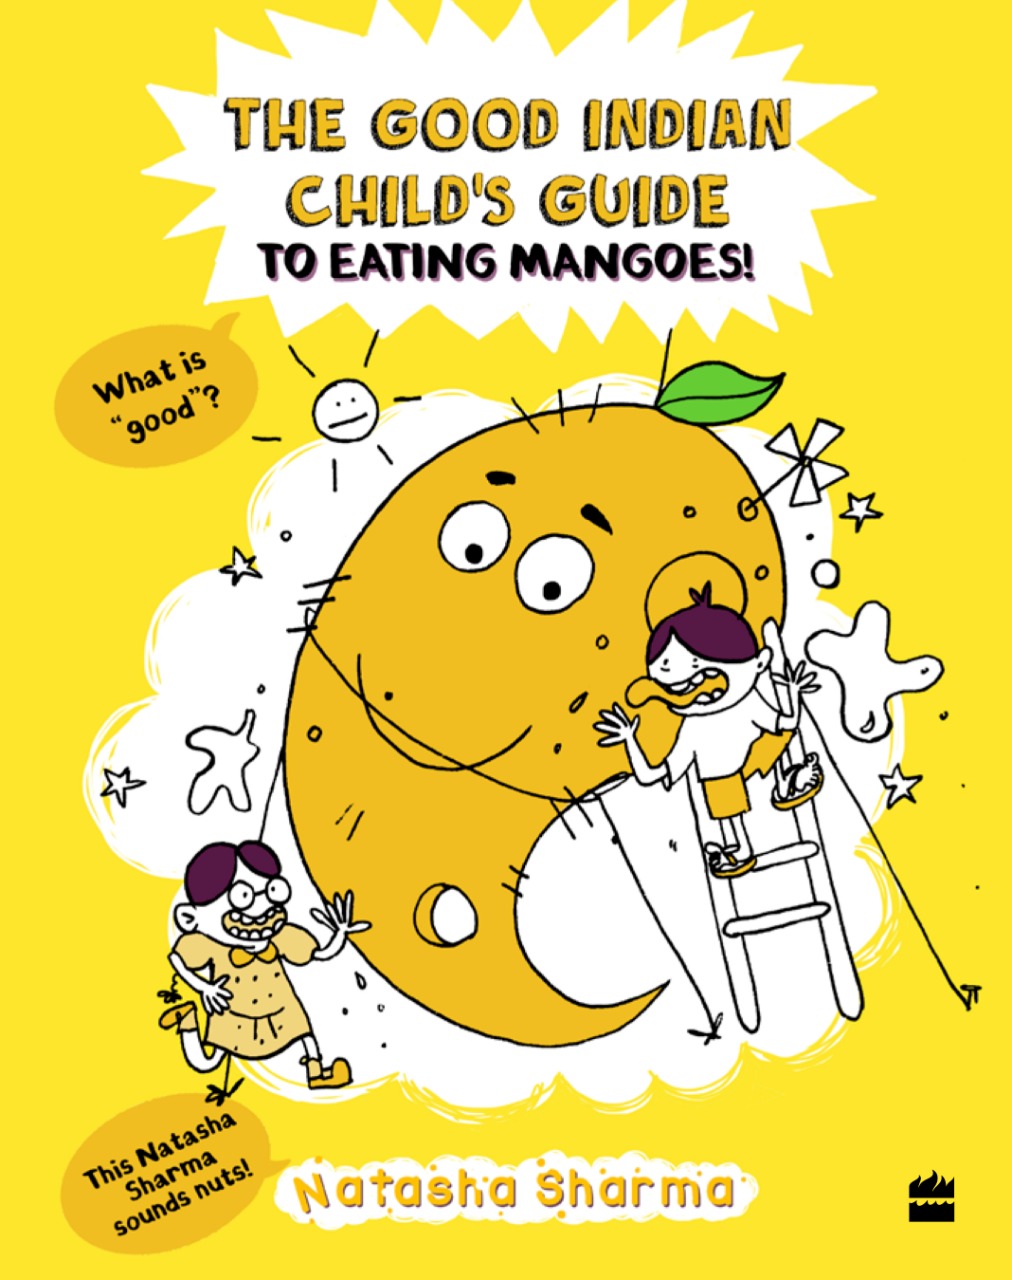 The Good Indian Childs Guide to Eating Mangoes by Natasha Sharma